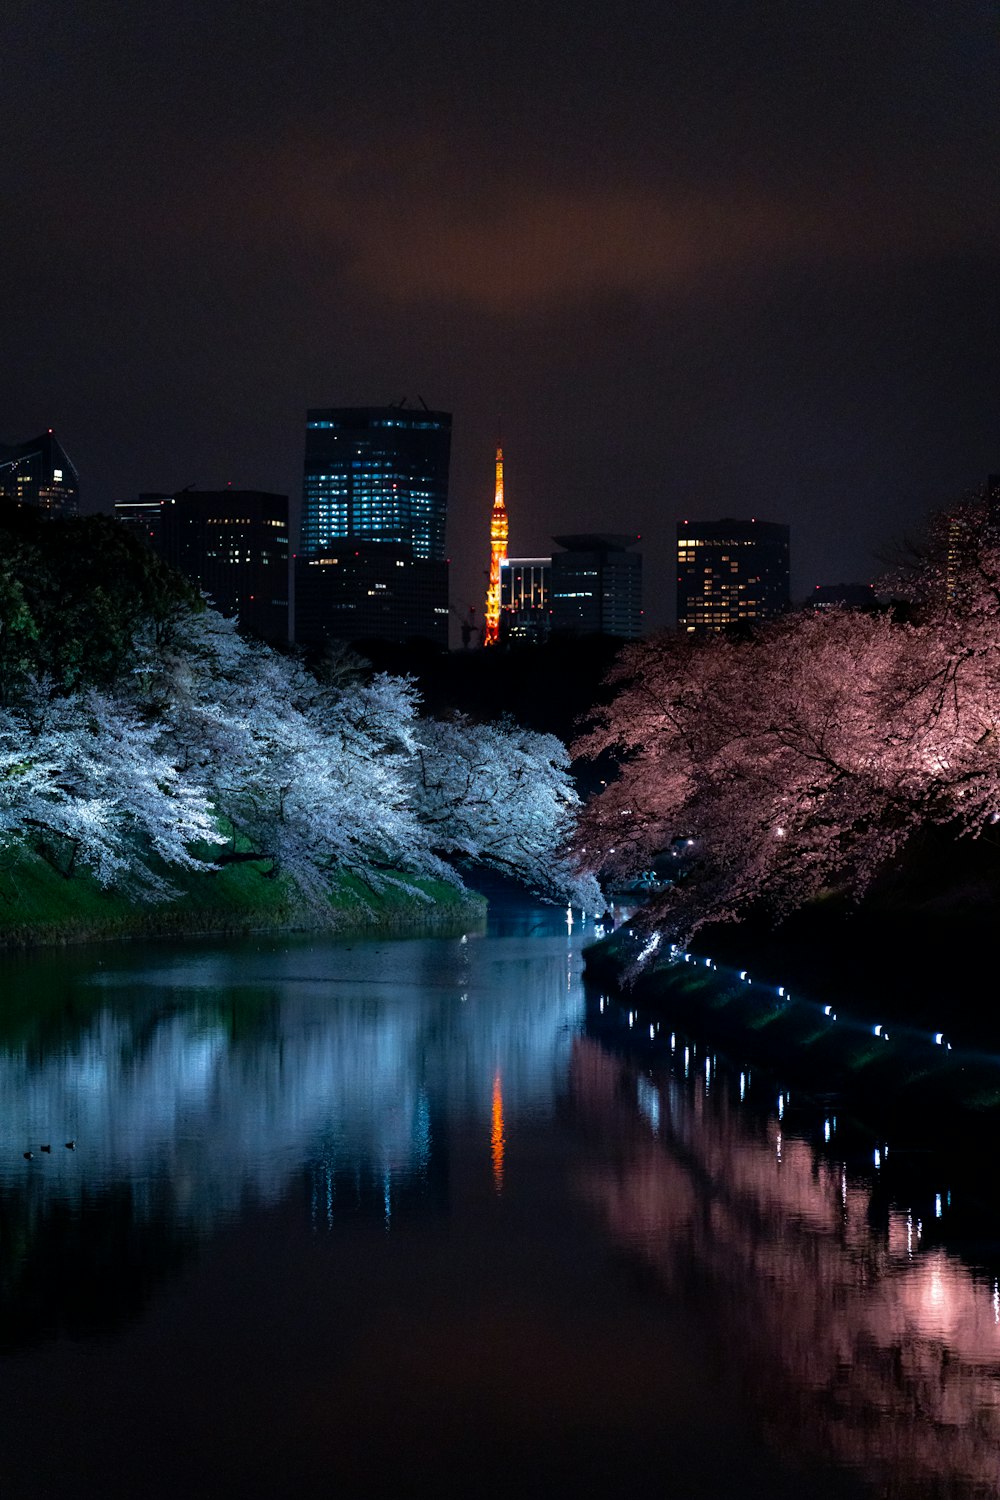 cherry blossoms are blooming along a river at night